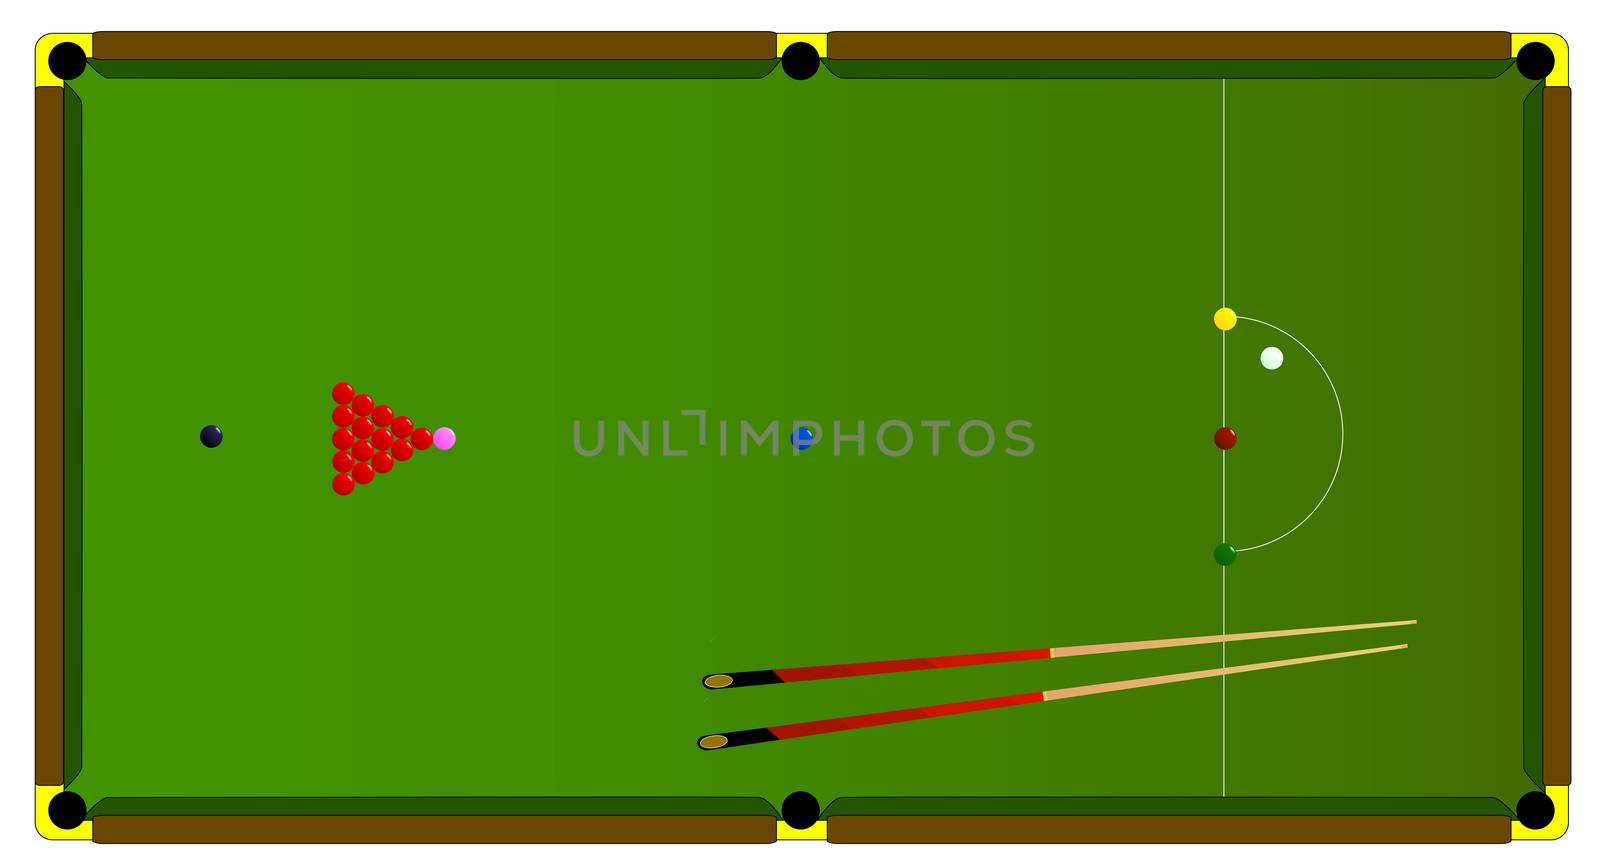 A typical full size snooker table with balls and snooker cues.